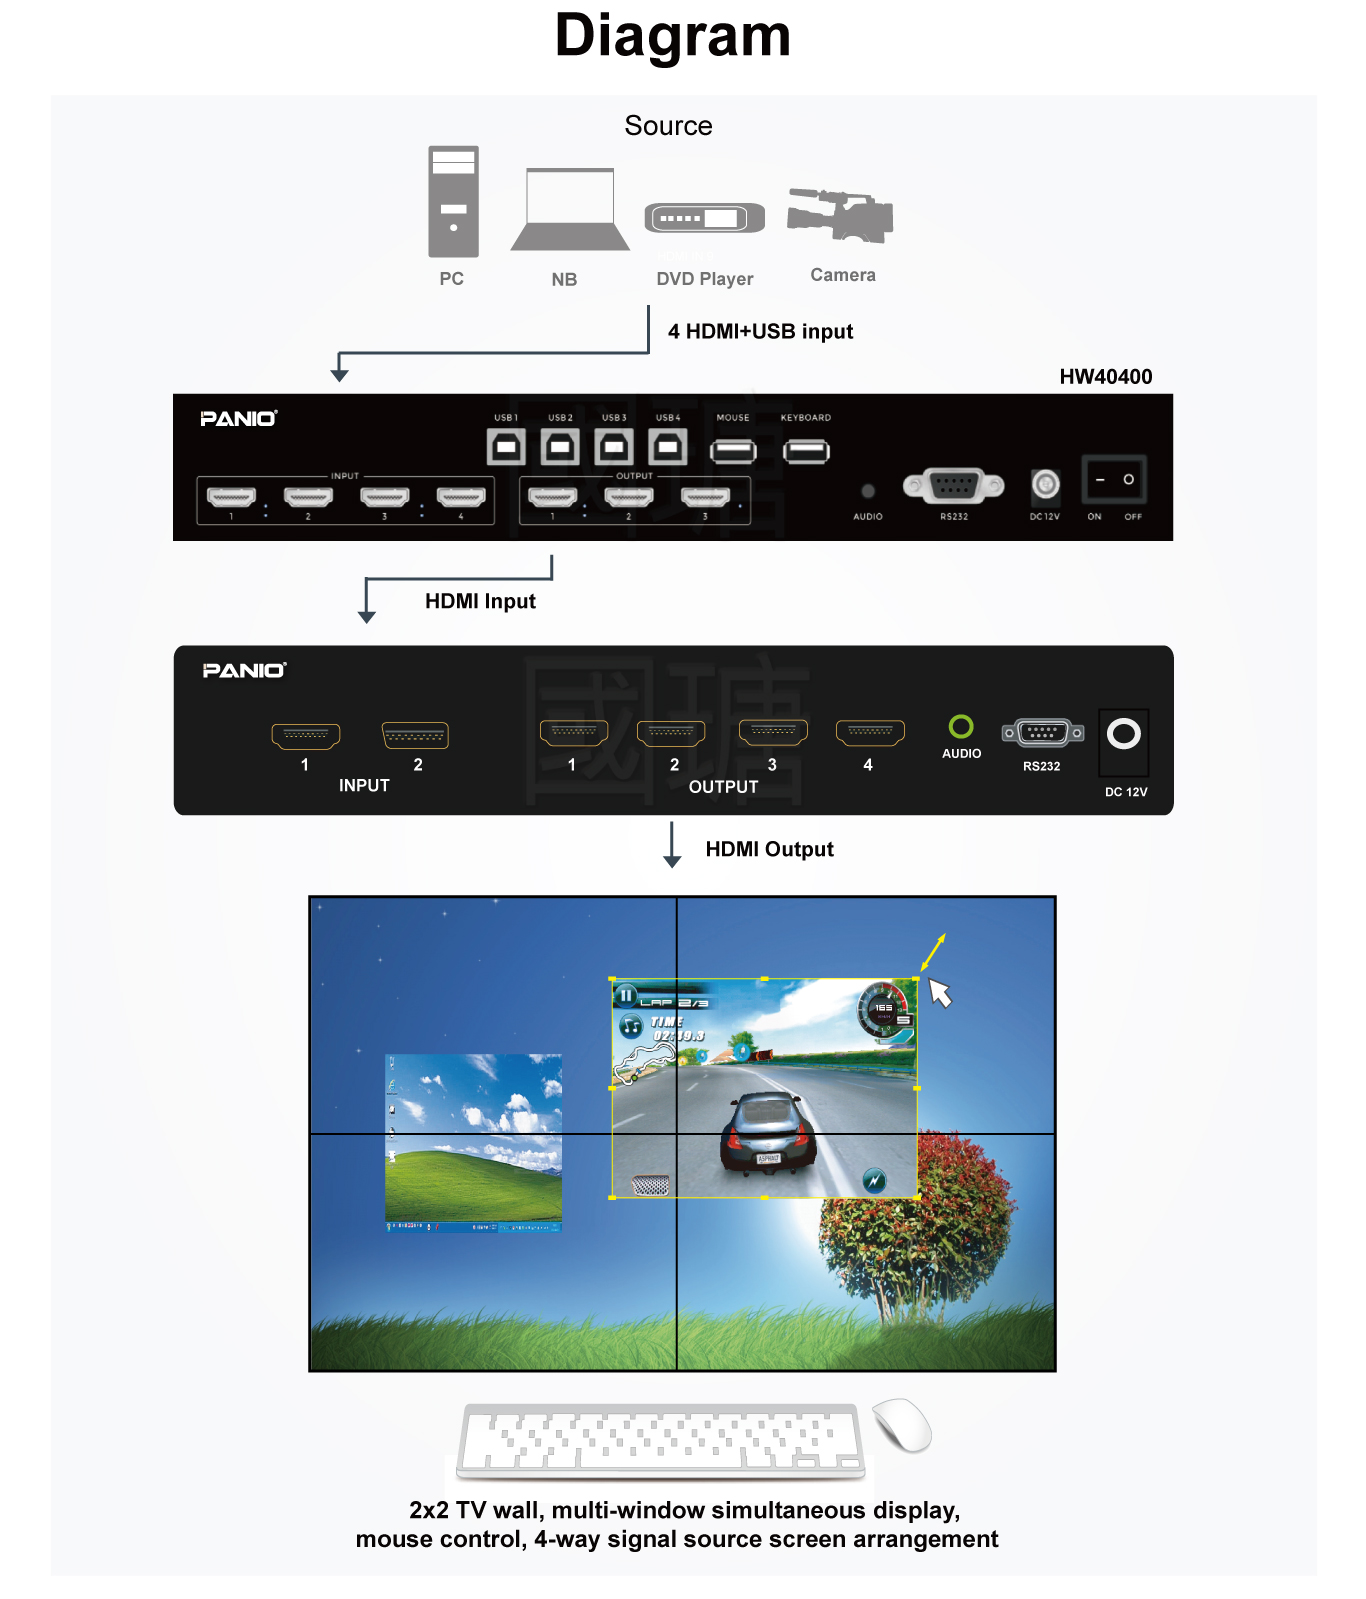 2x2 Video Wall: Multi-Window Display, Mouse Control, 4-Channel Signal Source Arrangement.